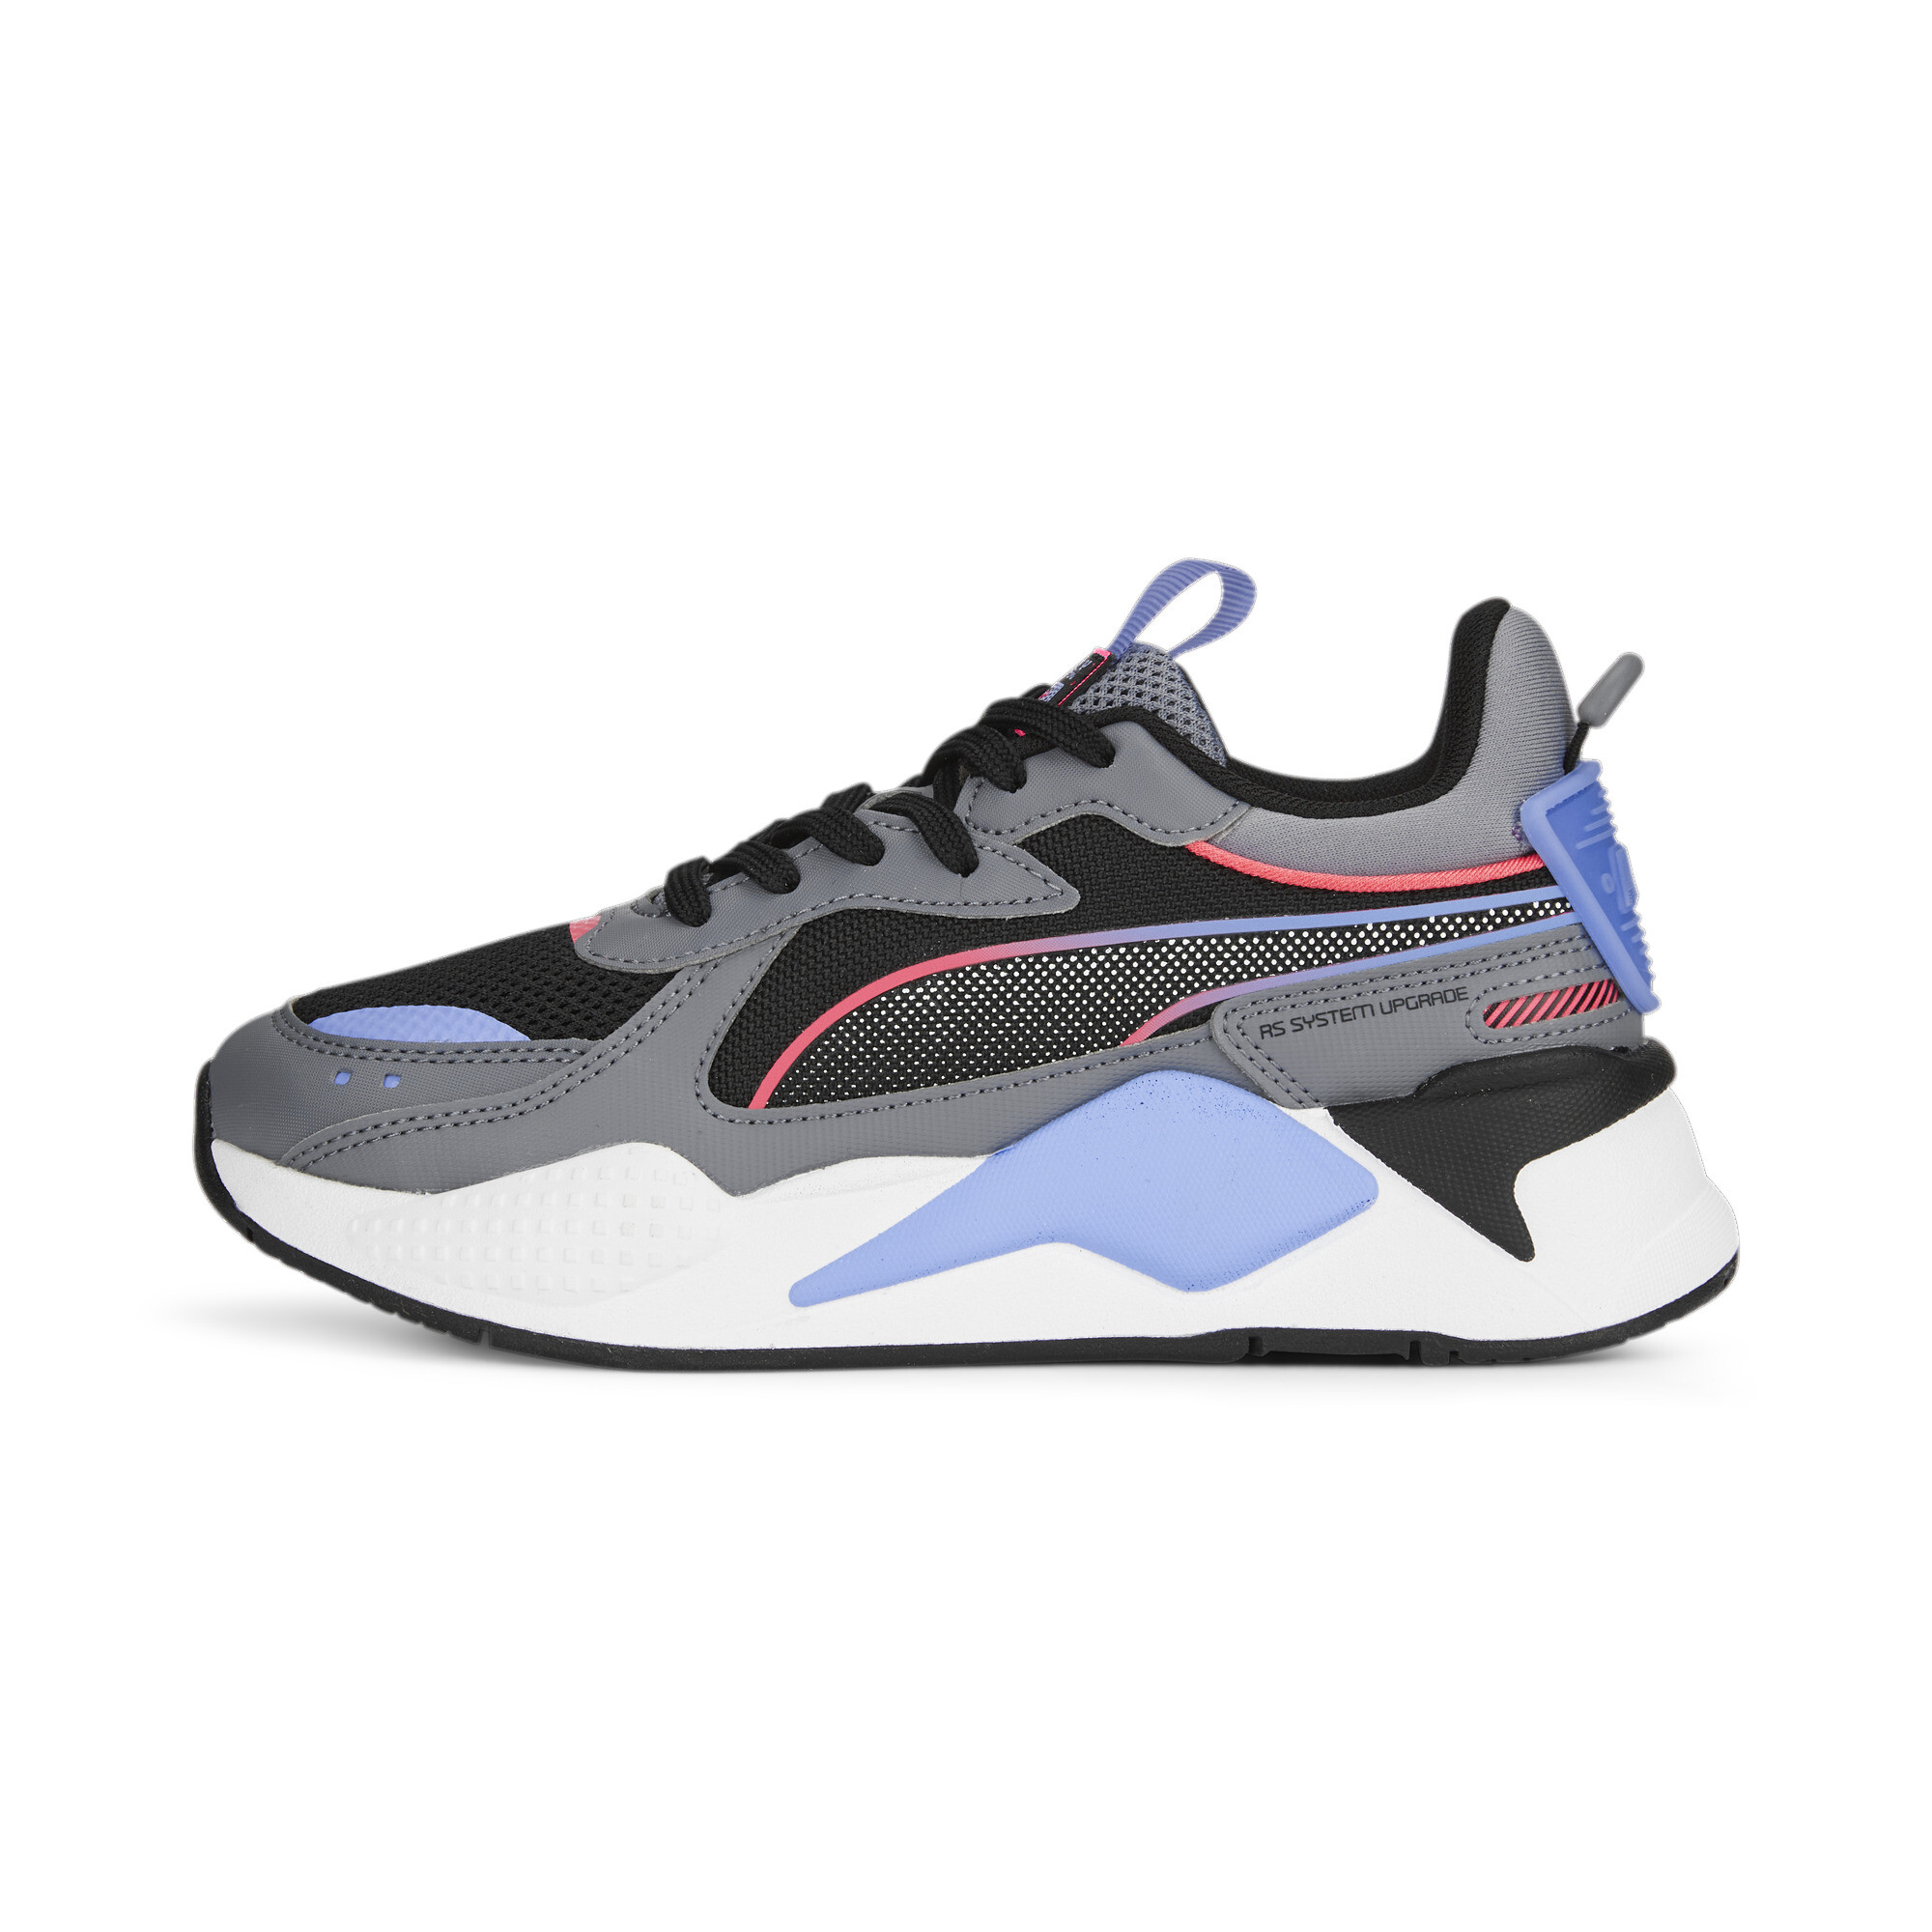 Puma RS-X 3D Sneakers Youth, Black, Size 35.5, Shoes